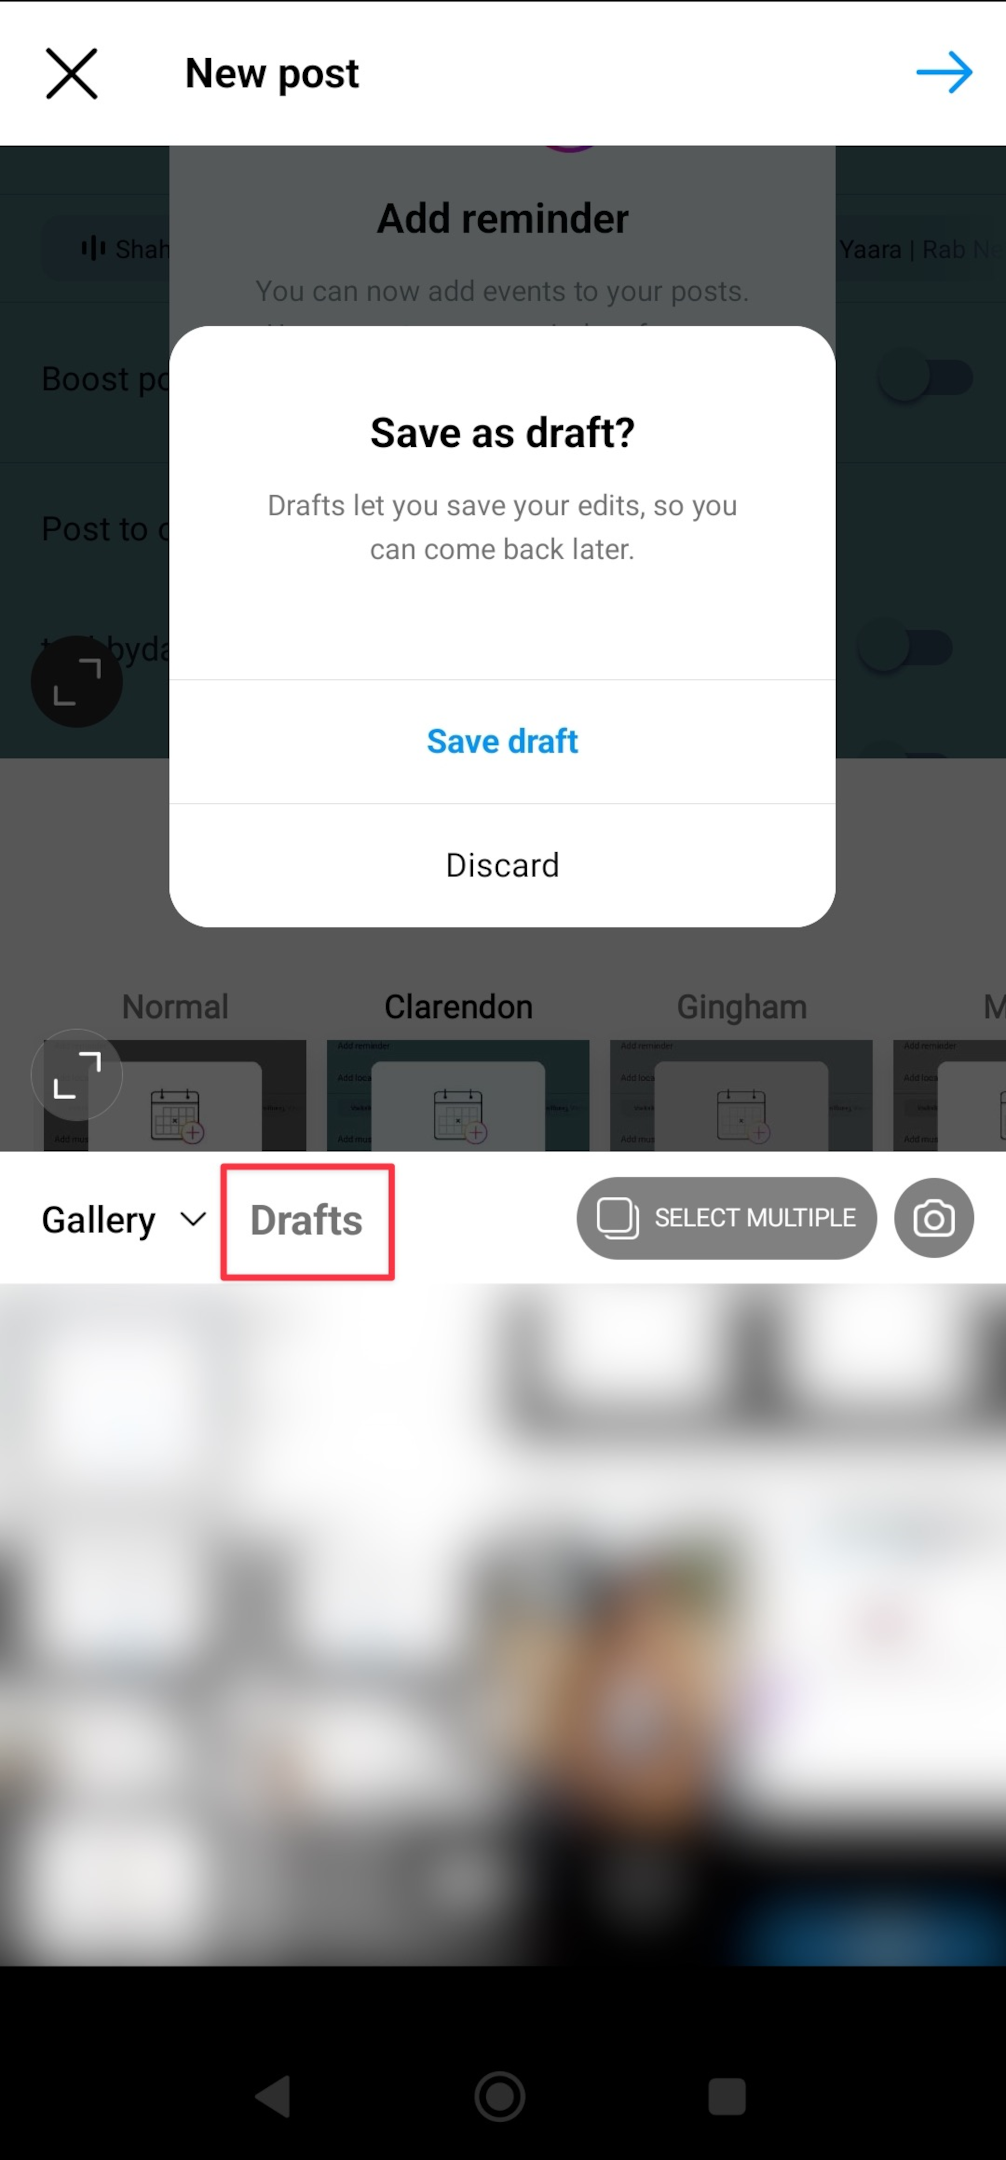 Remote.tools shows how to find drafts on Instagram on Android phone